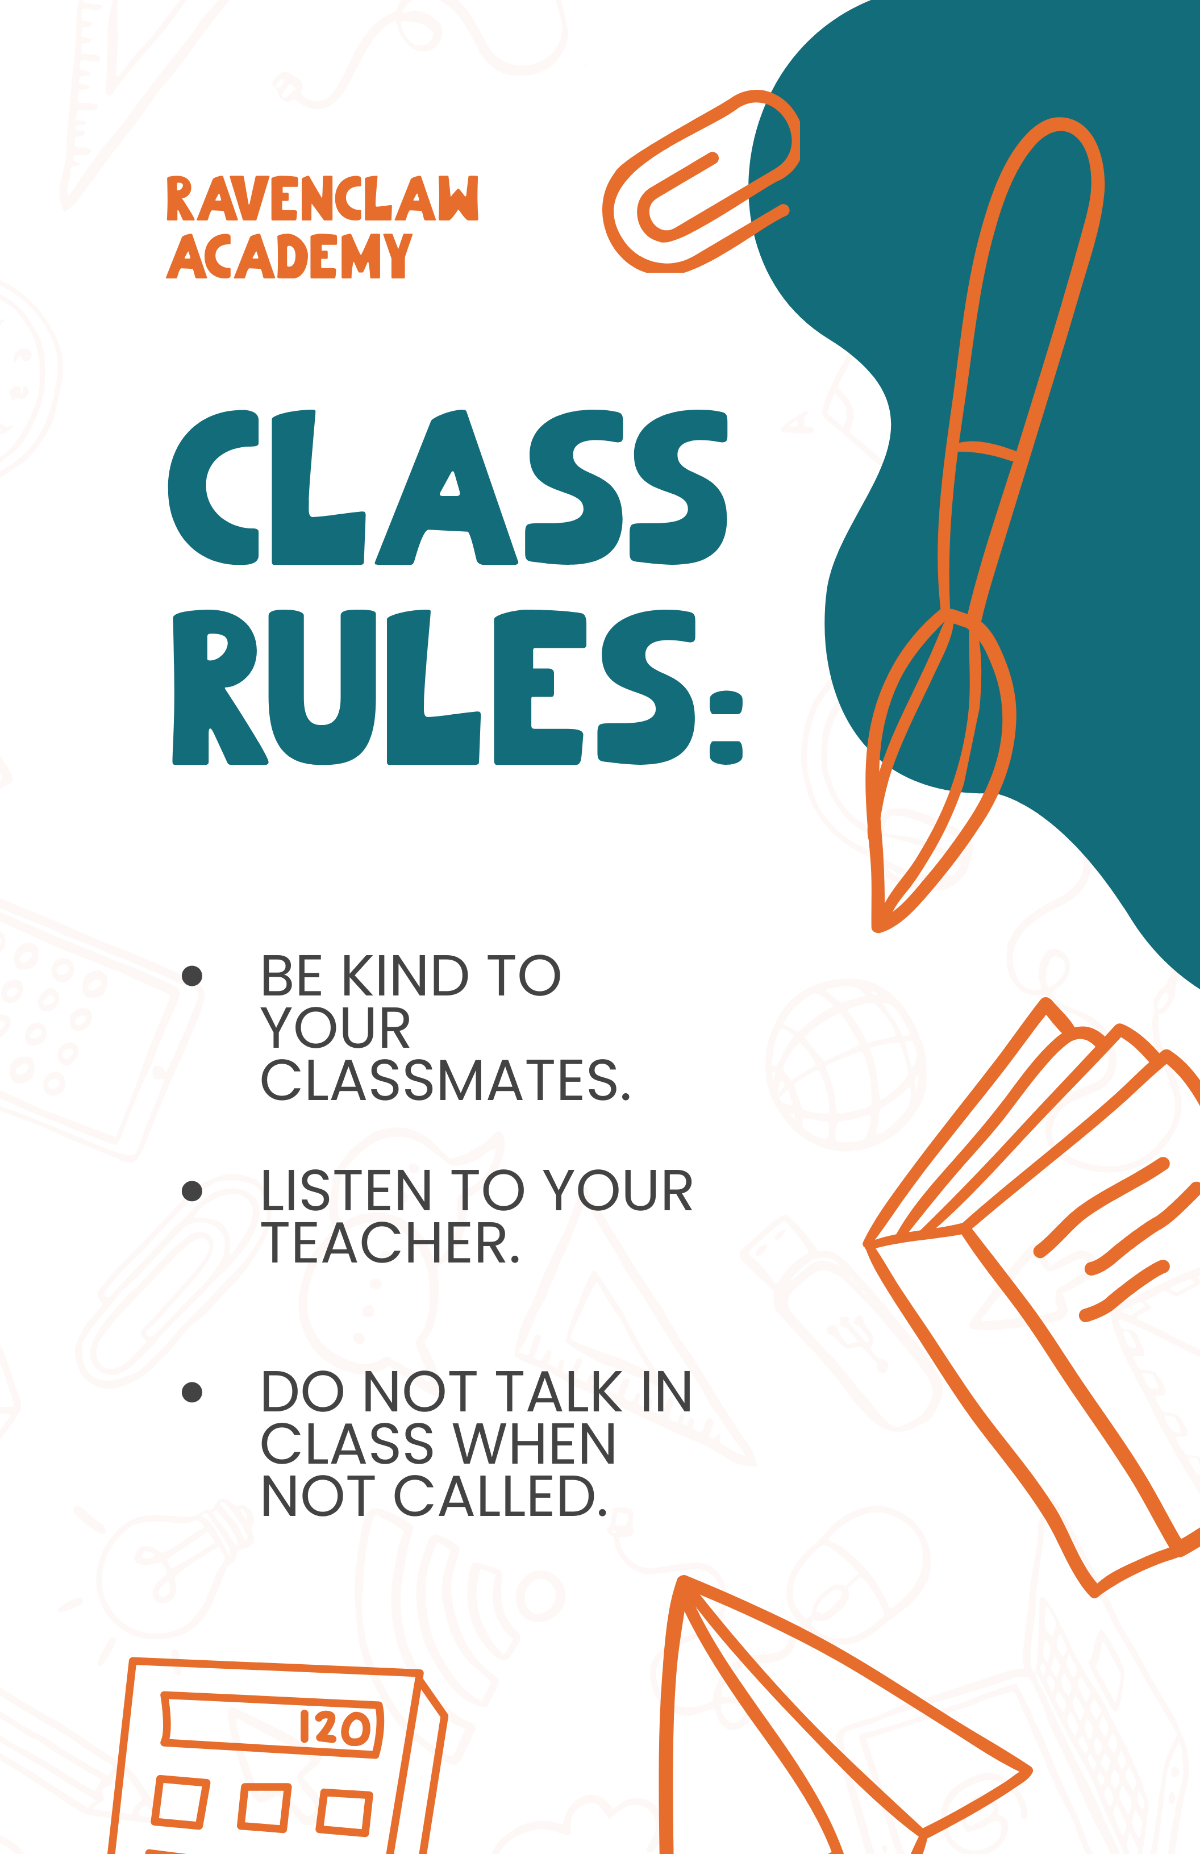 Classroom Rules Poster Template